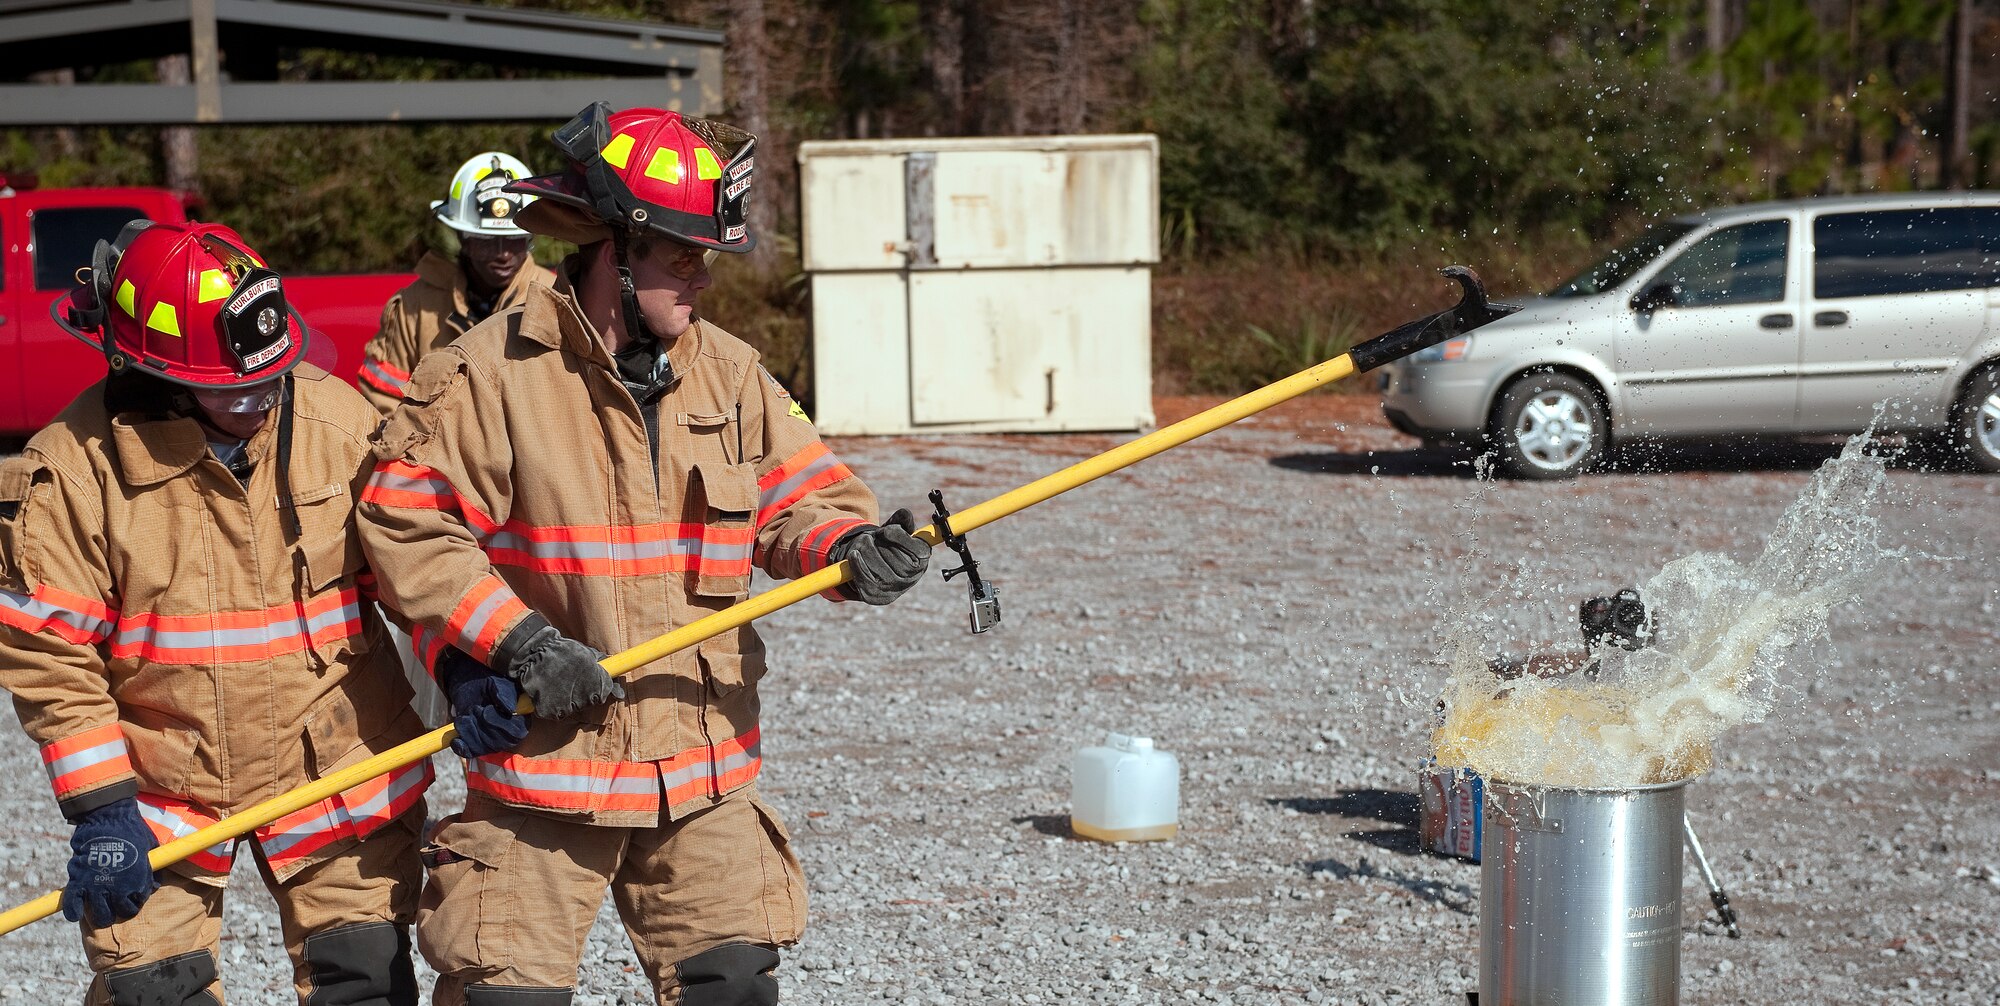 Firefighters from 1st Special Operations Civil Engineer Squadron drop a frozen turkey into hot cooking oil during a safety demonstration at the fire training area on Hurlburt Field, Fla., Nov. 27, 2013. Maintaining a safe distance from buildings and other flammable objects and not overfilling a turkey fryer can prevent potential fires. (U.S. Air Force photo/Senior Airman Kentavist P. Brackin)